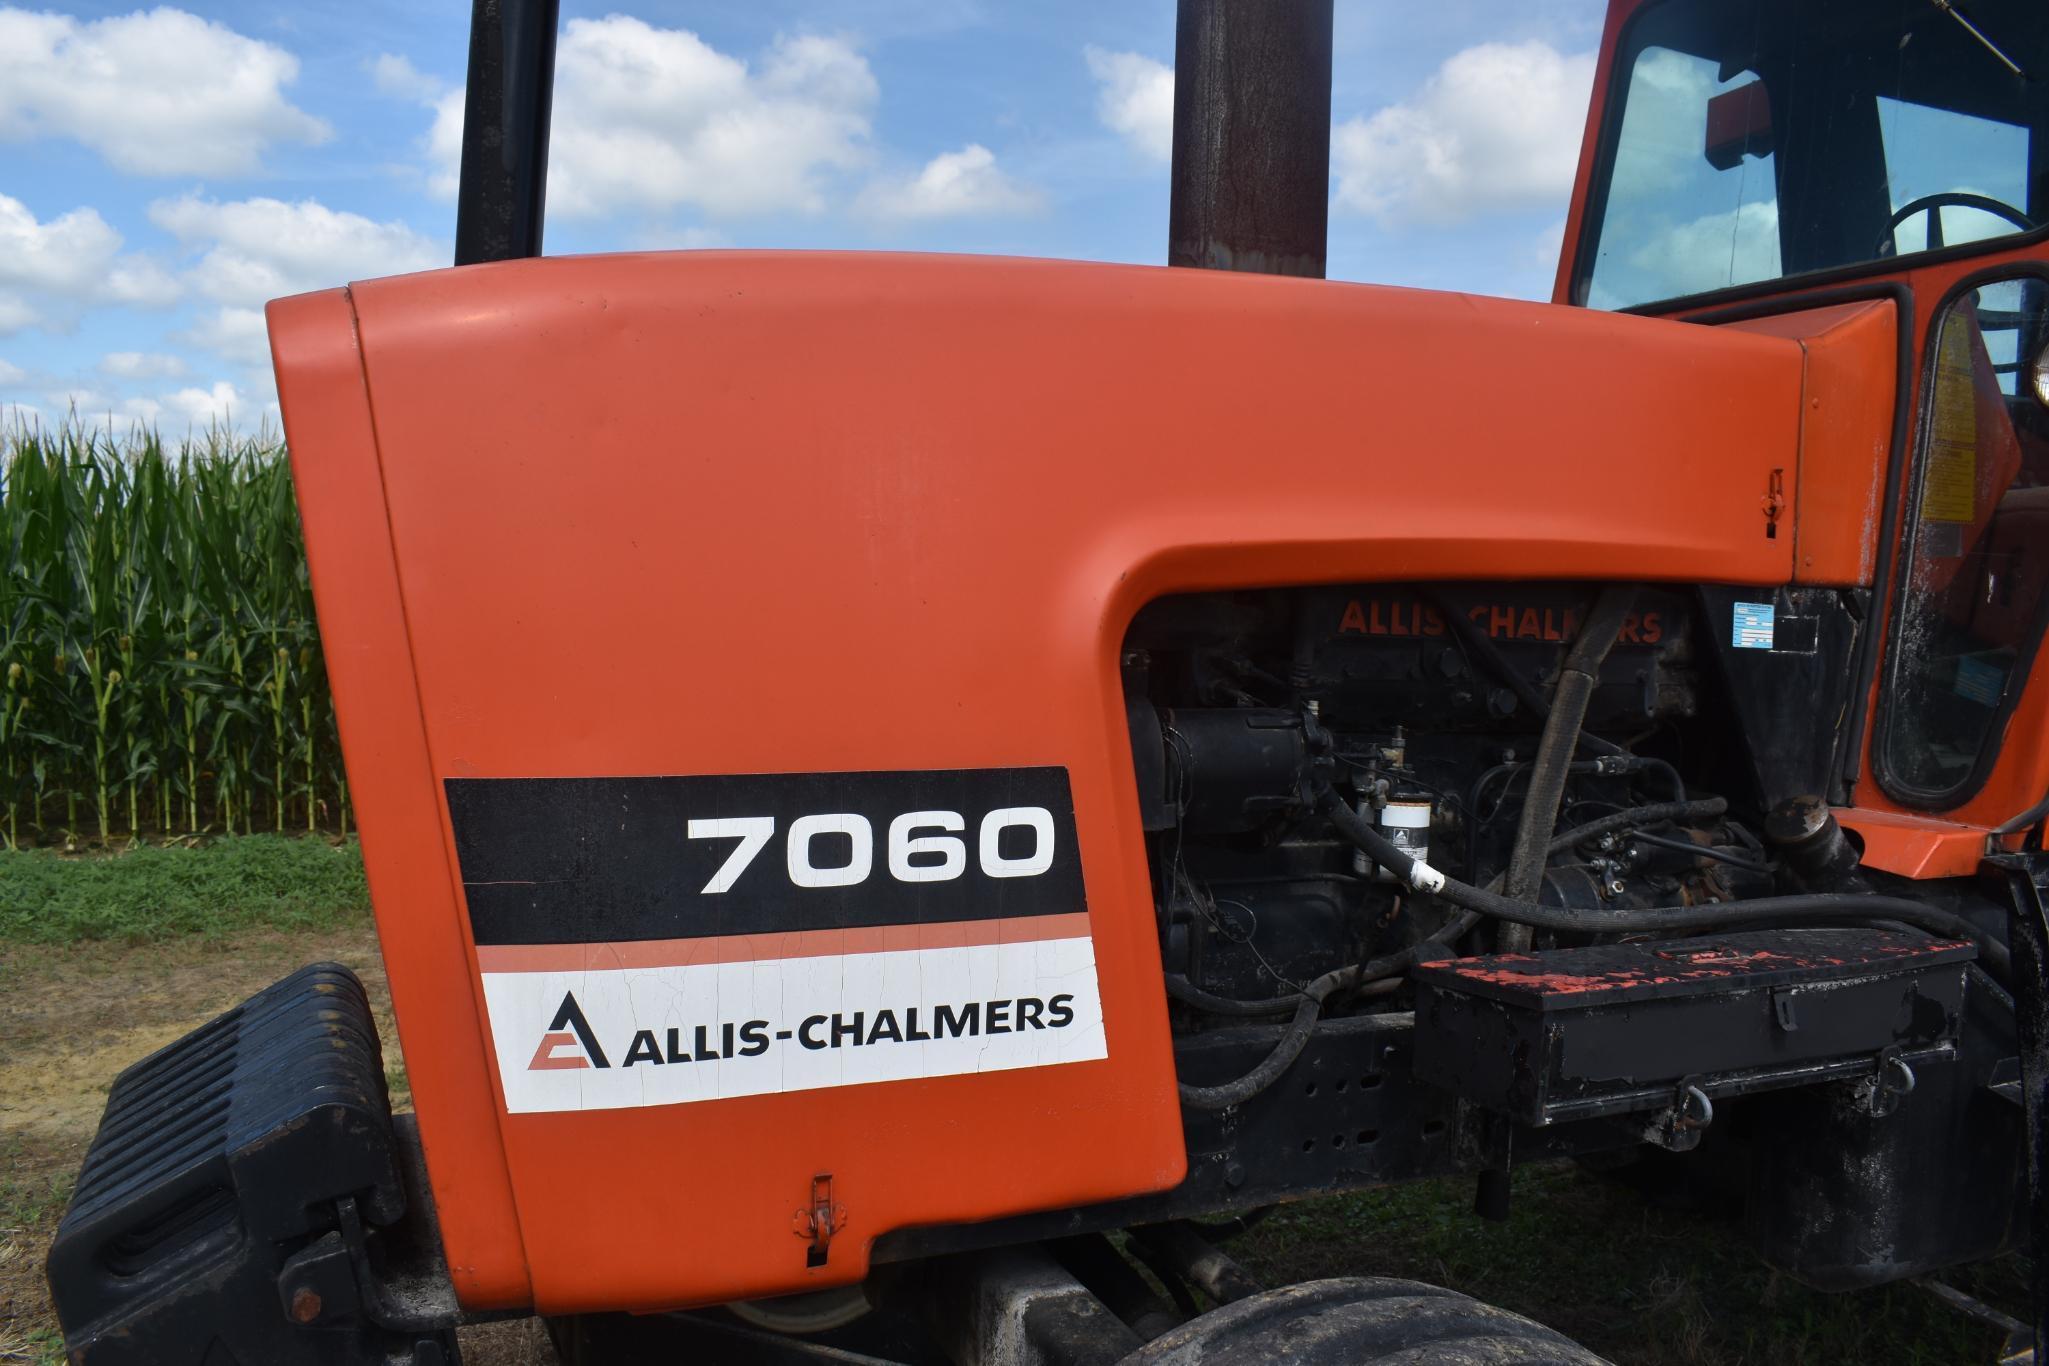 1979 Allis-Chalmers 7060 2wd tractor